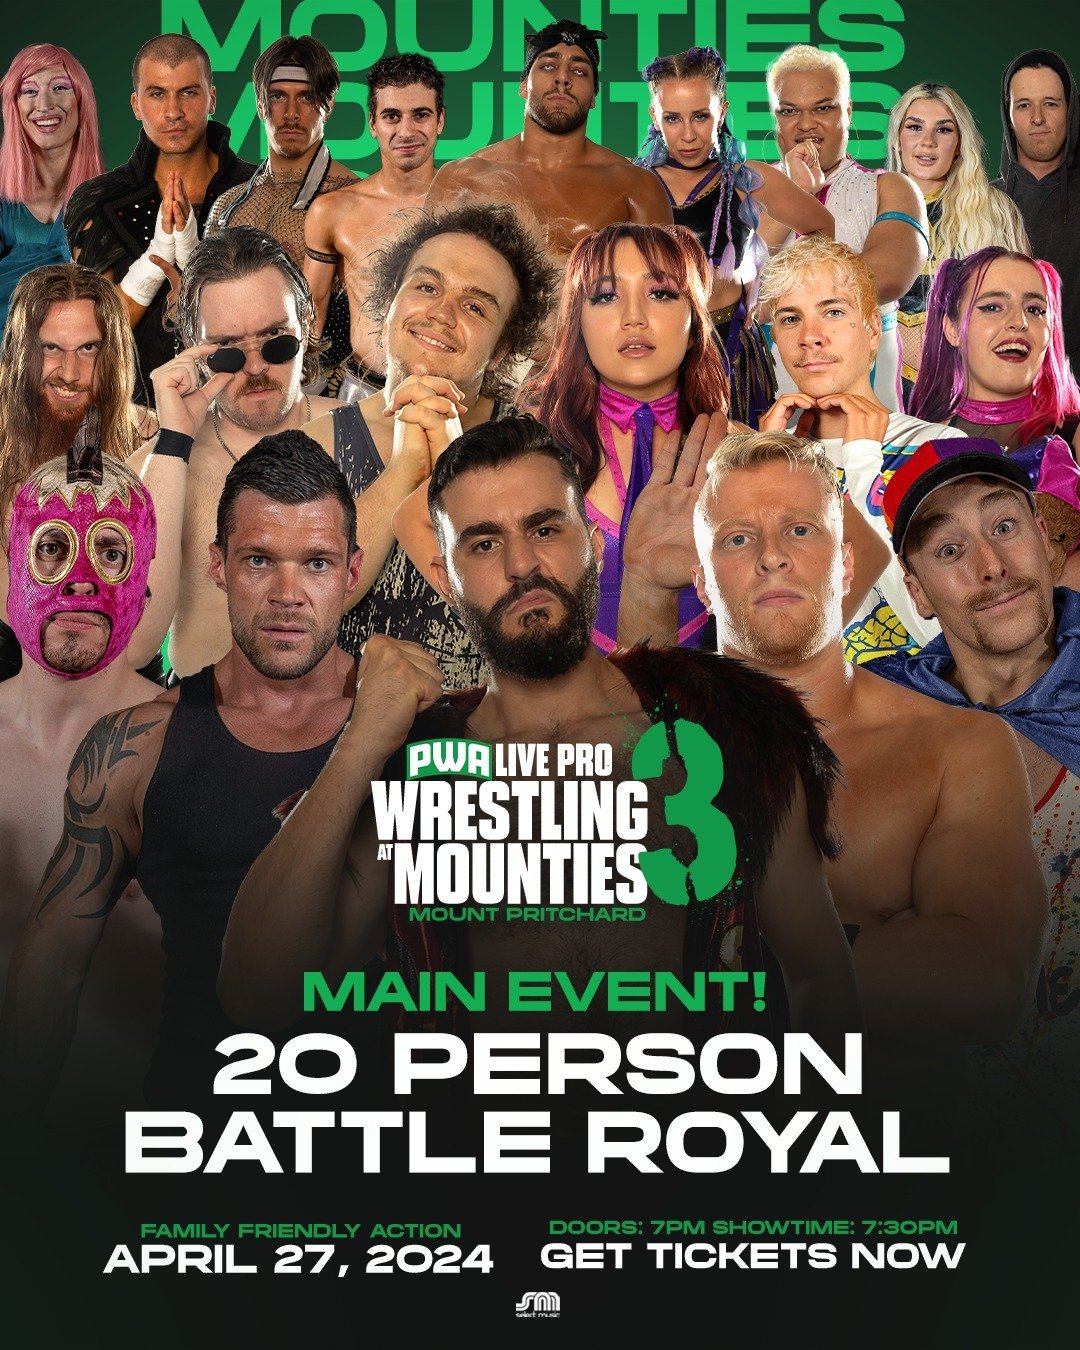 20 PERSON Battle Royal for the MOUNTIES CUP is TOMORROW 🚨

PWA Live at the @mountiesclub 
APRIL 27 📌
🚪 DOORS: 7PM 🛎️ SHOWTIME: 7:30PM
Get Tix Now🎟️➡️ INBIO